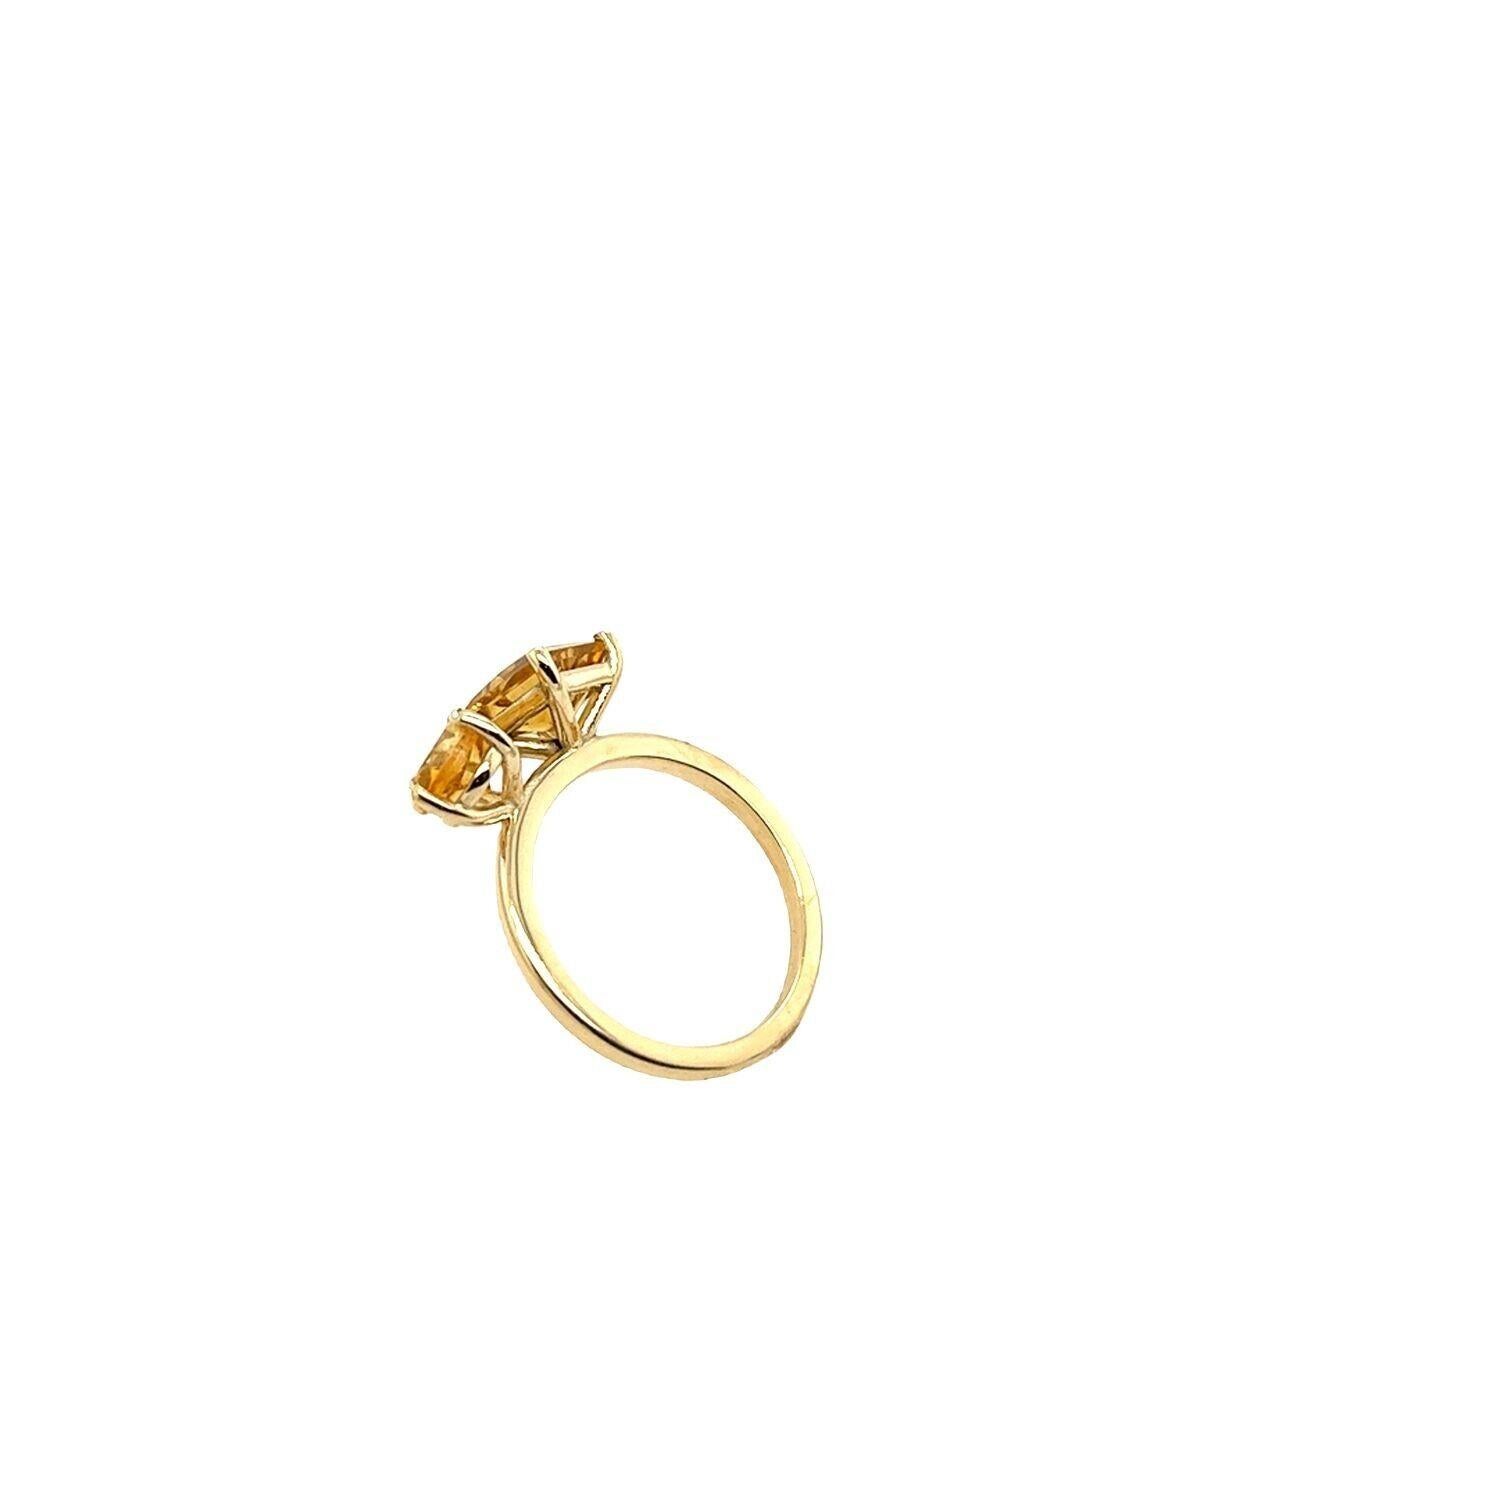 The Toi et Moi Golden Citrine 2.74ct Ring in 14ct Yellow Gold In New Condition For Sale In London, GB